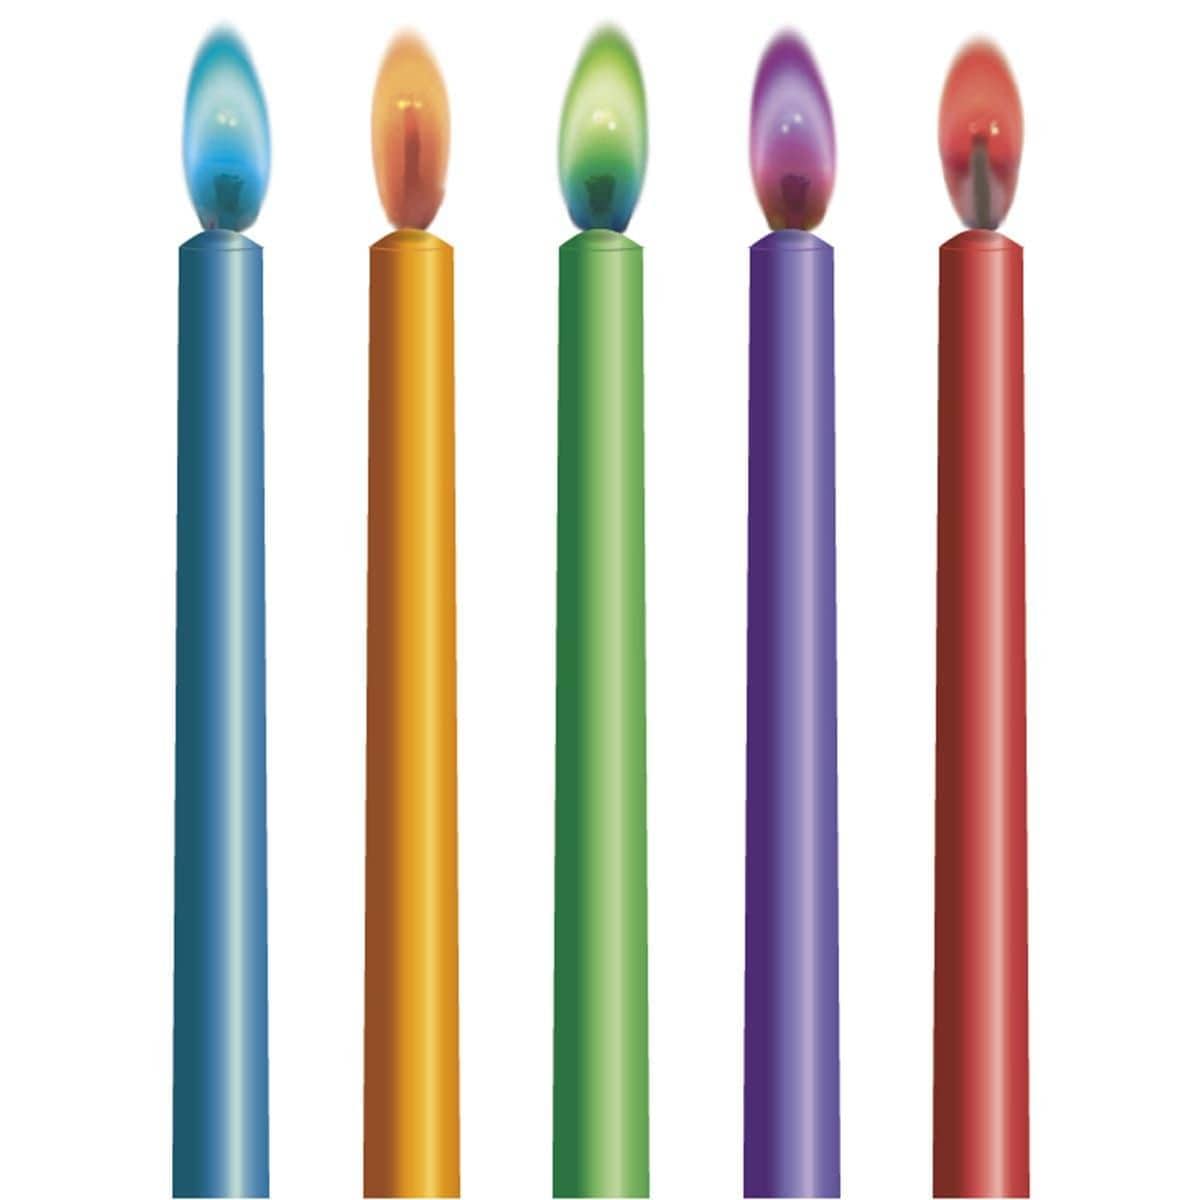 Buy Cake Supplies Color Flames Candles & Holders 10/pkg. sold at Party Expert